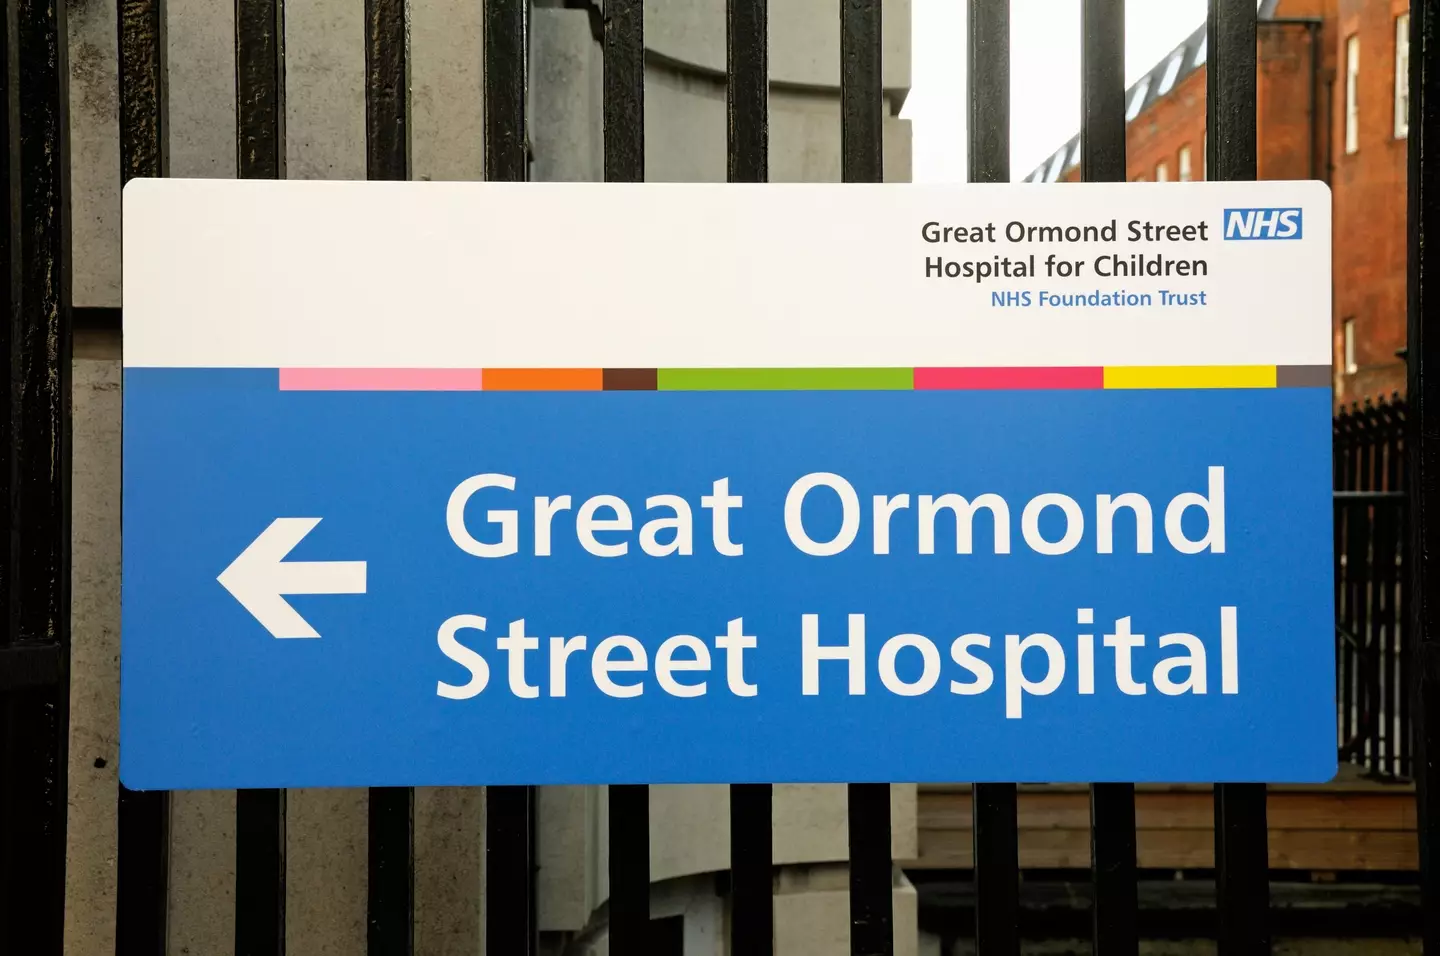 The taxi driver said he doesn't charge people who go to Great Ormand Street Hospital.